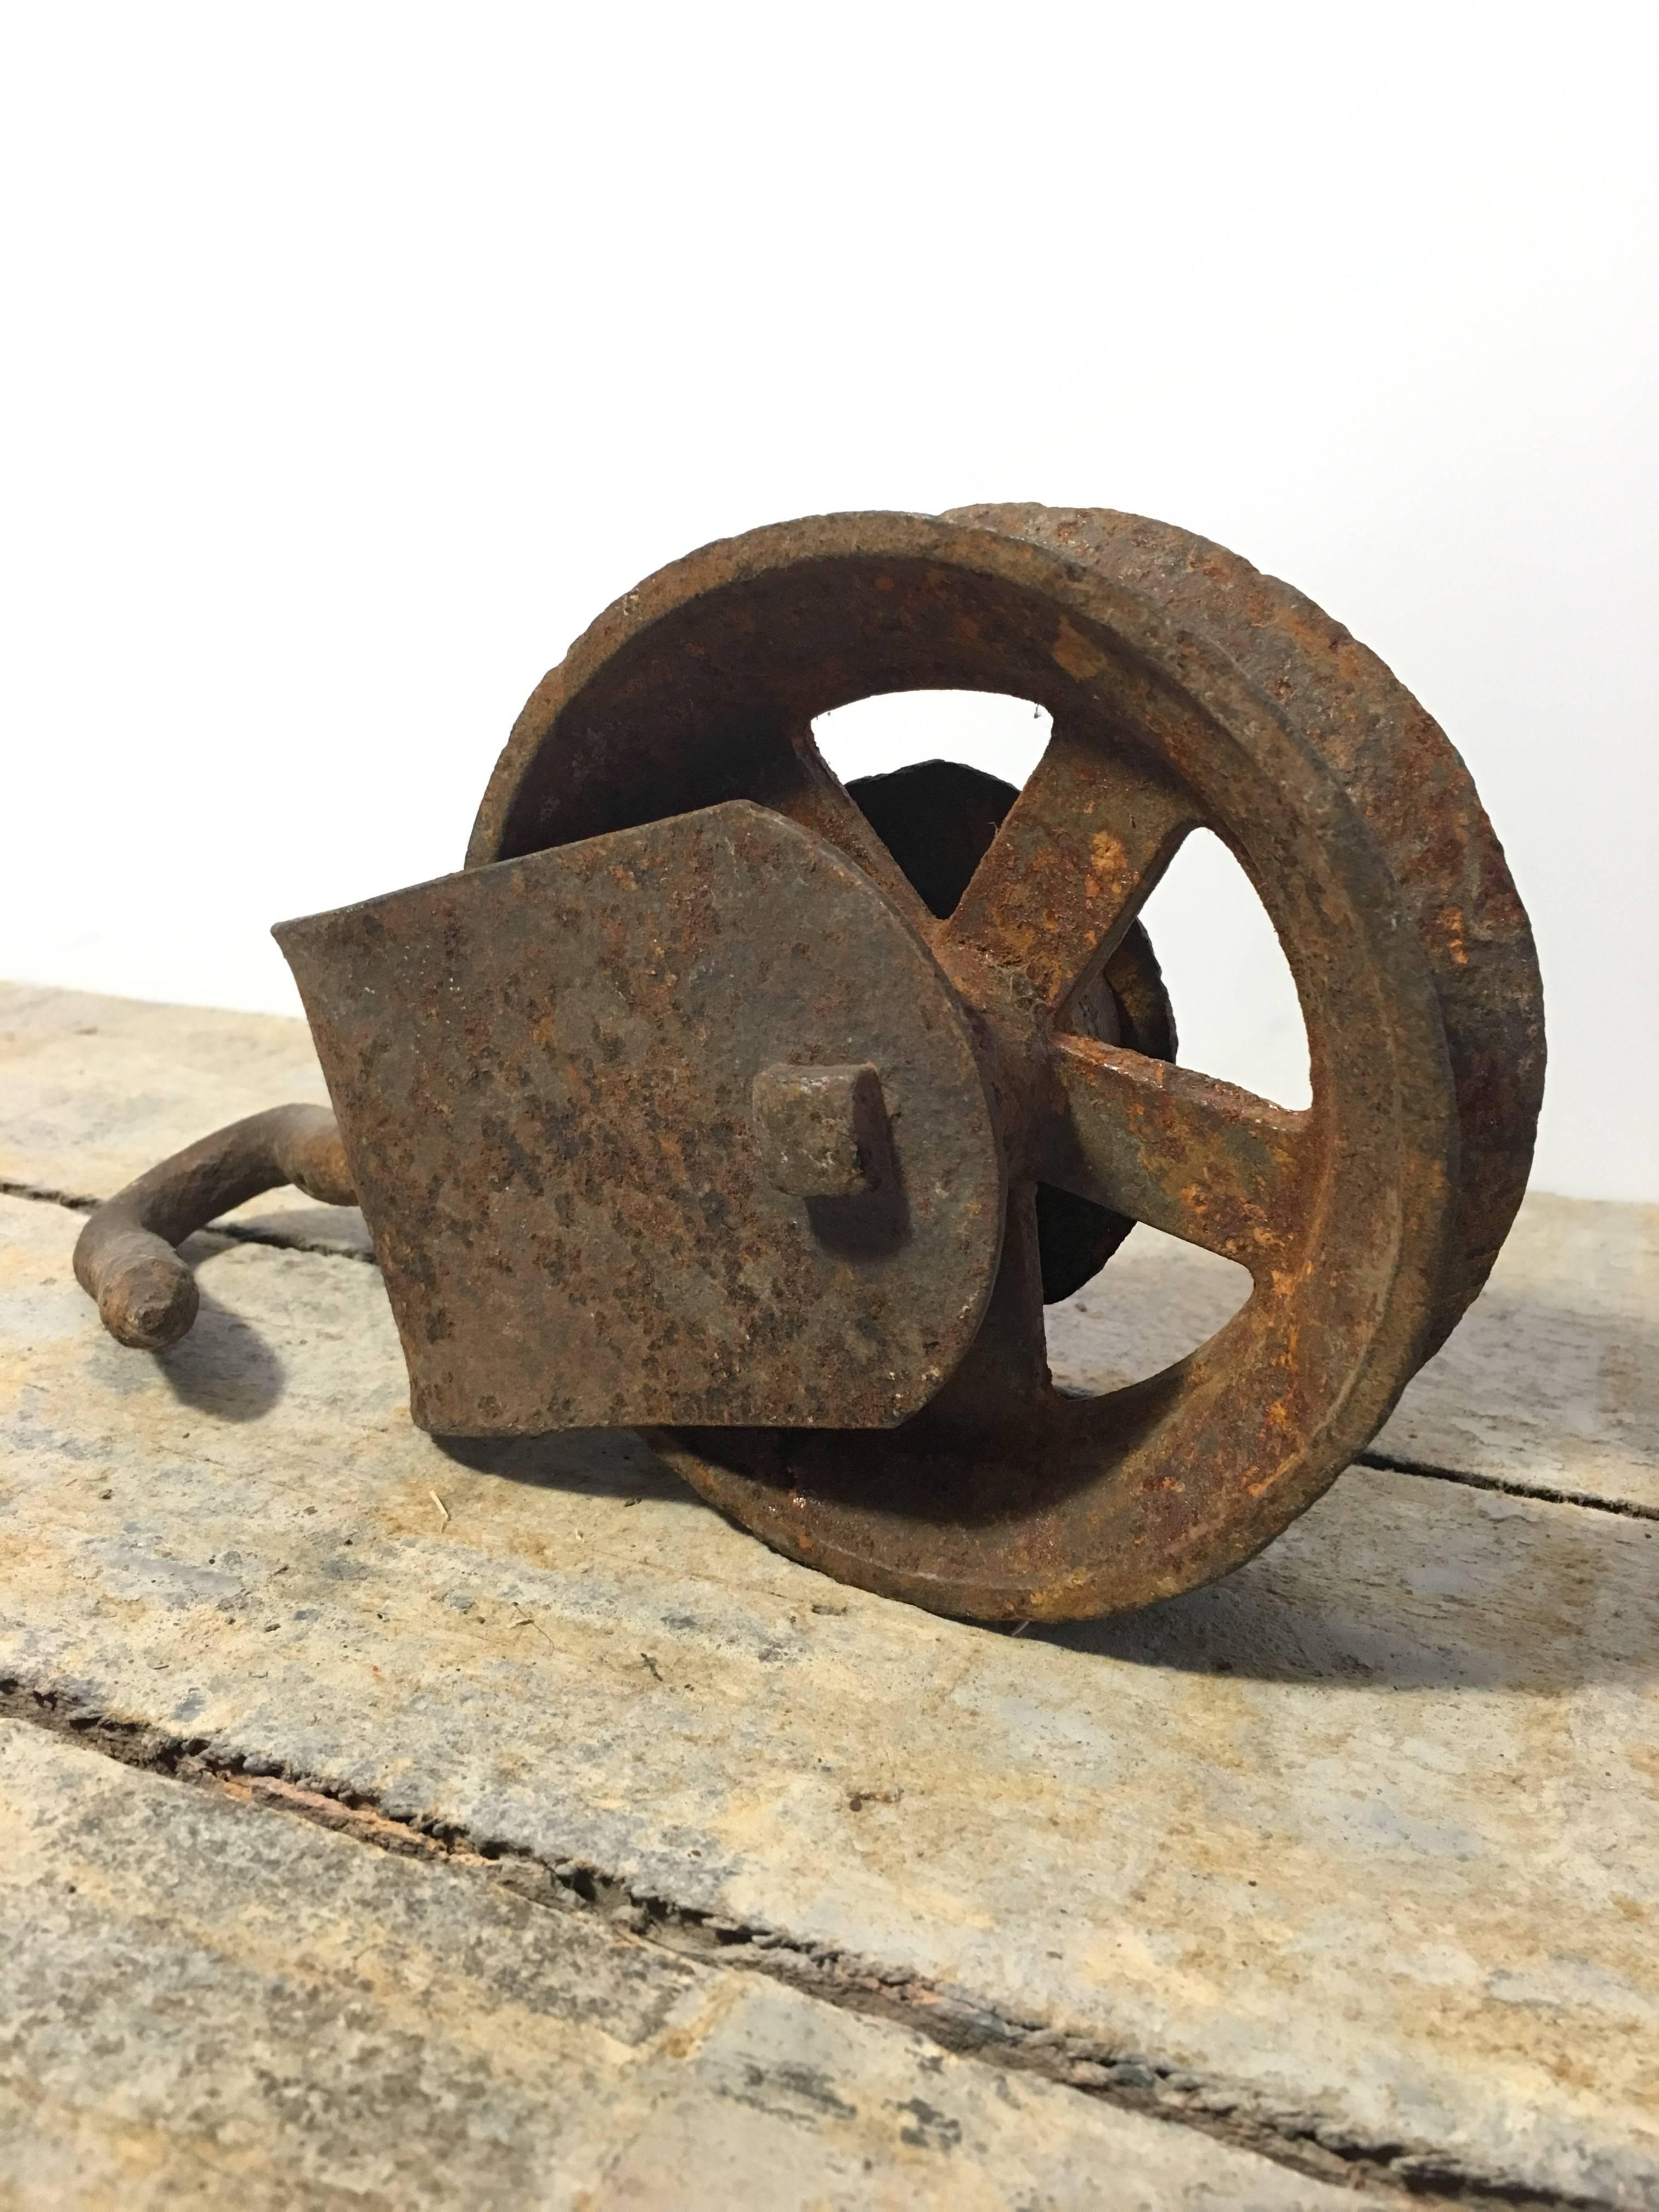 Antique single metal pulley with a hook. Minor wear consistent with age and use.